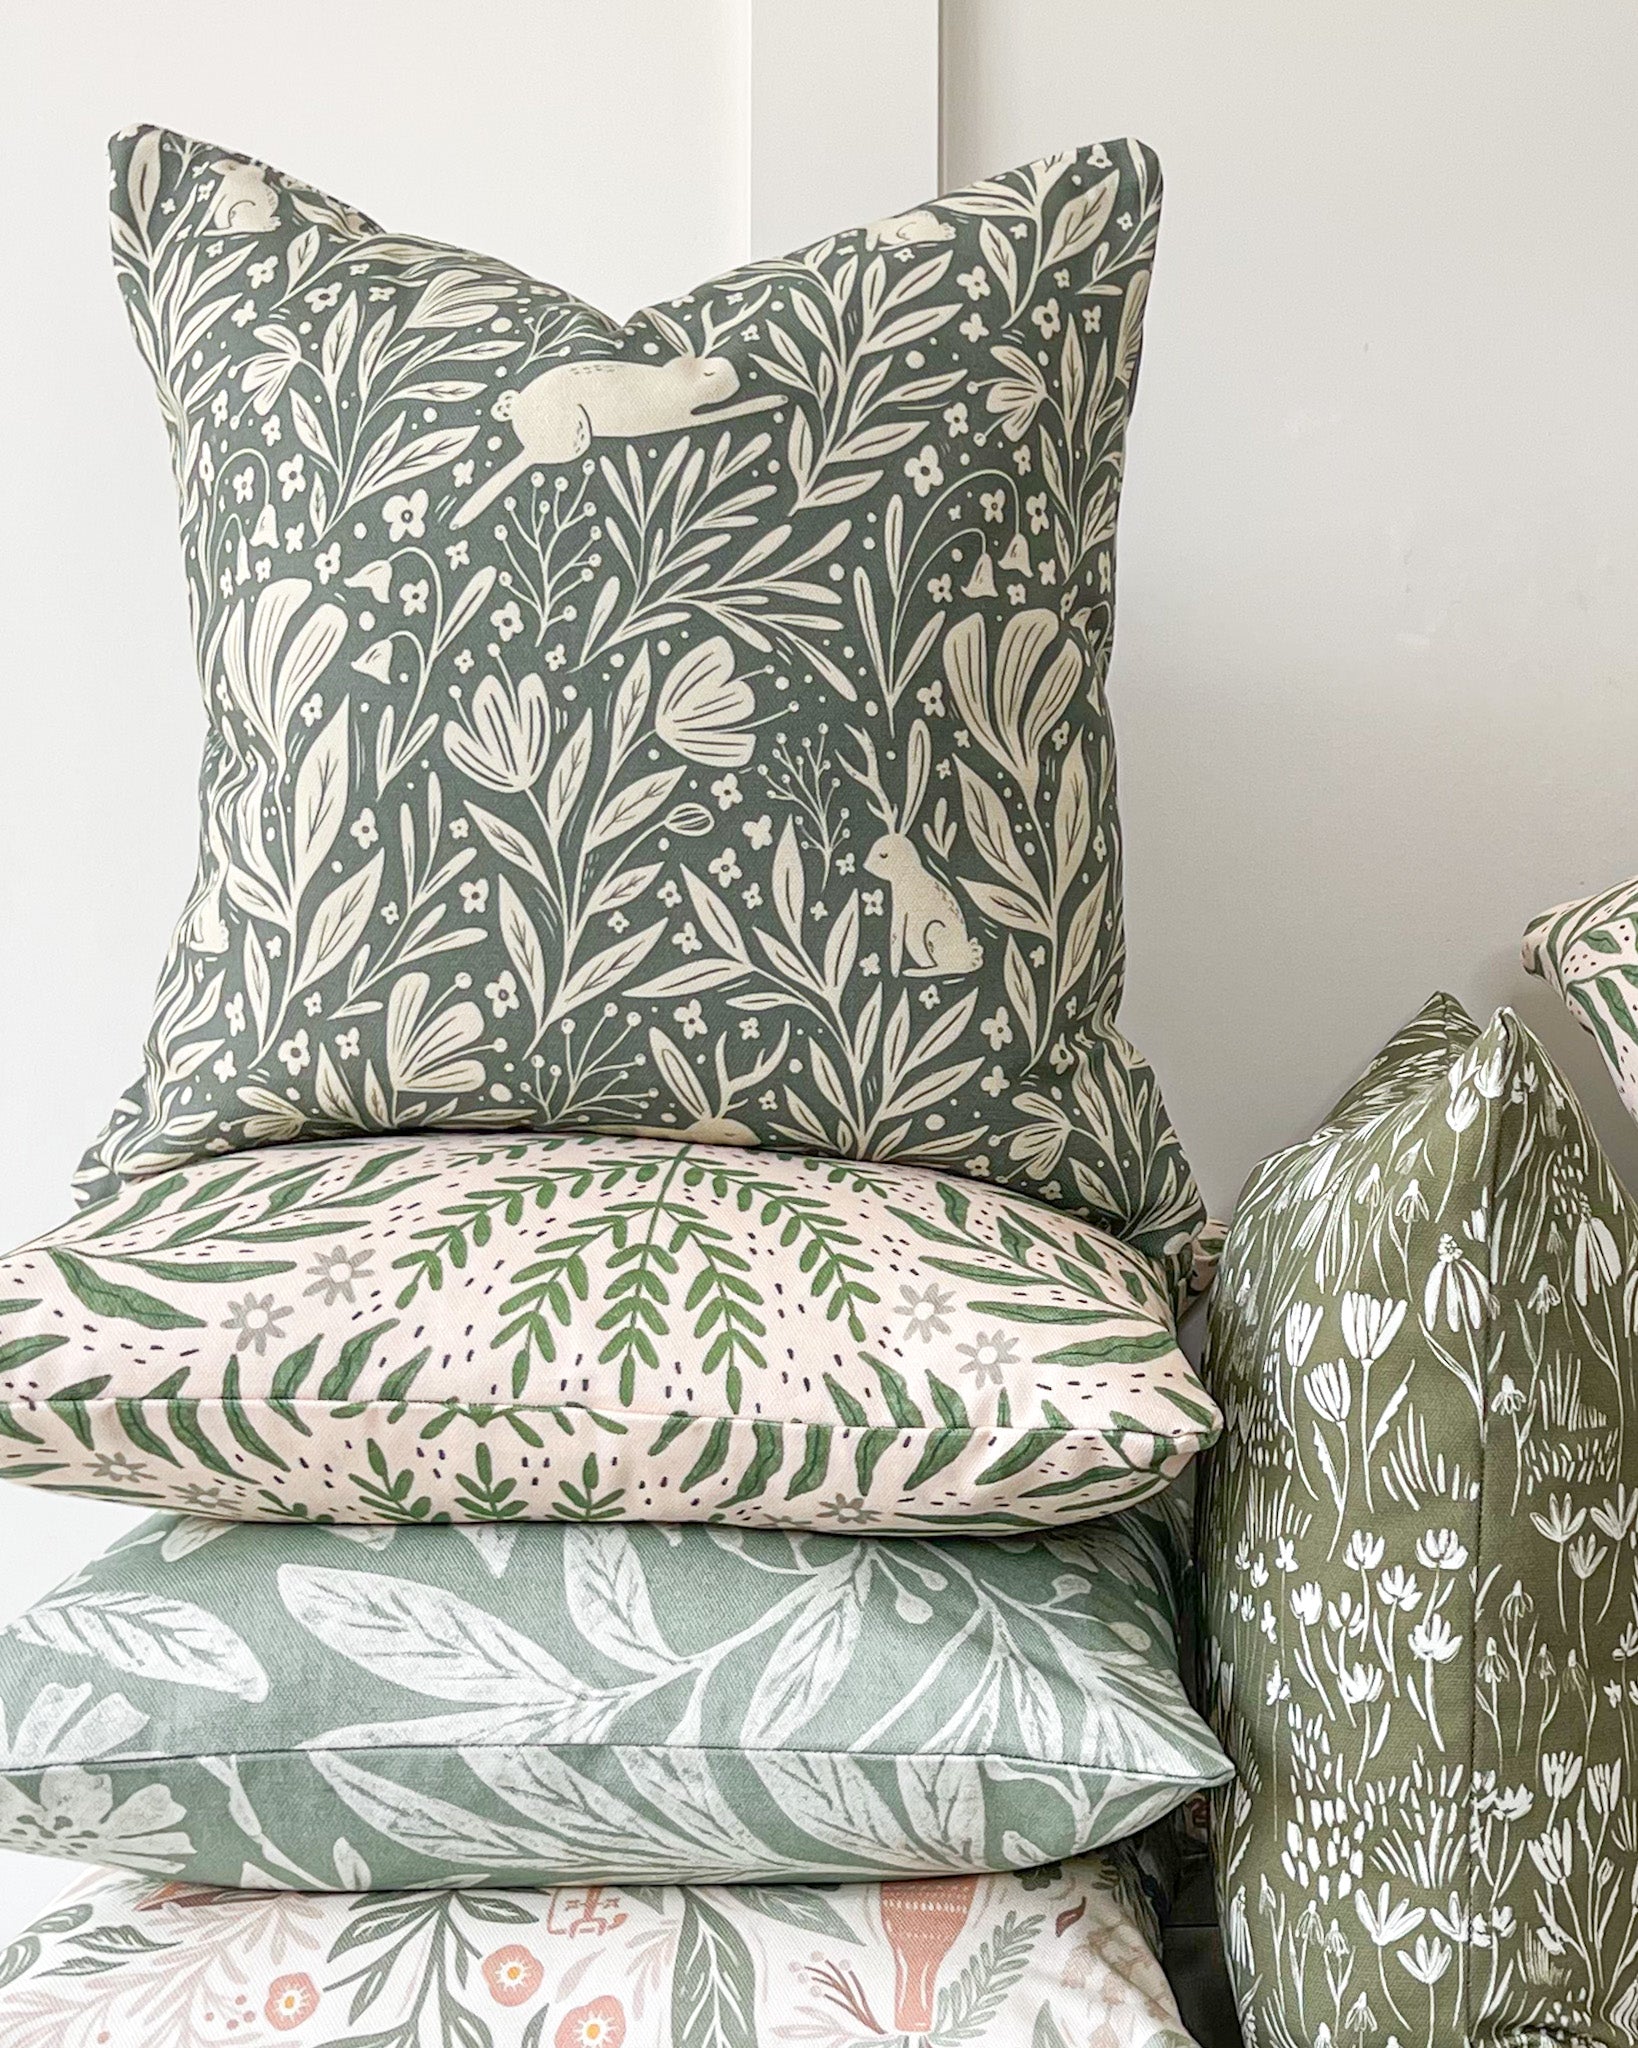 Whispering Woodland Cushion featuring an enchanting botanical pattern with a leaping hare with one ear and one antler, set against a deep blue-green background with a murky cream foreground.